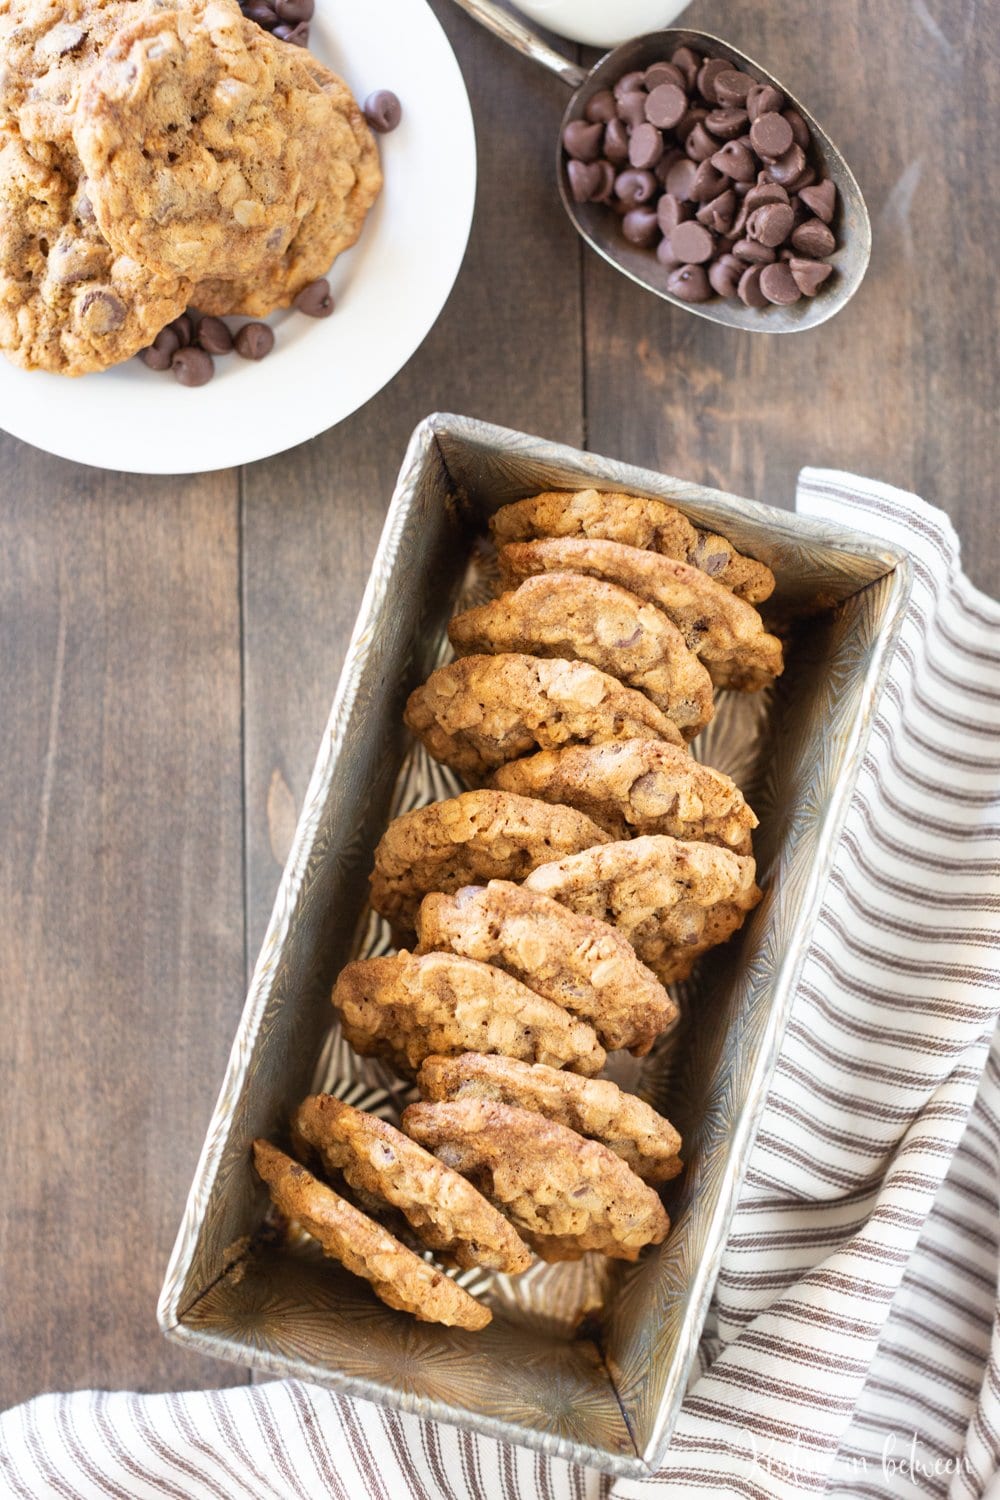 These are the perfect chewy oatmeal chocolate chip cookies!